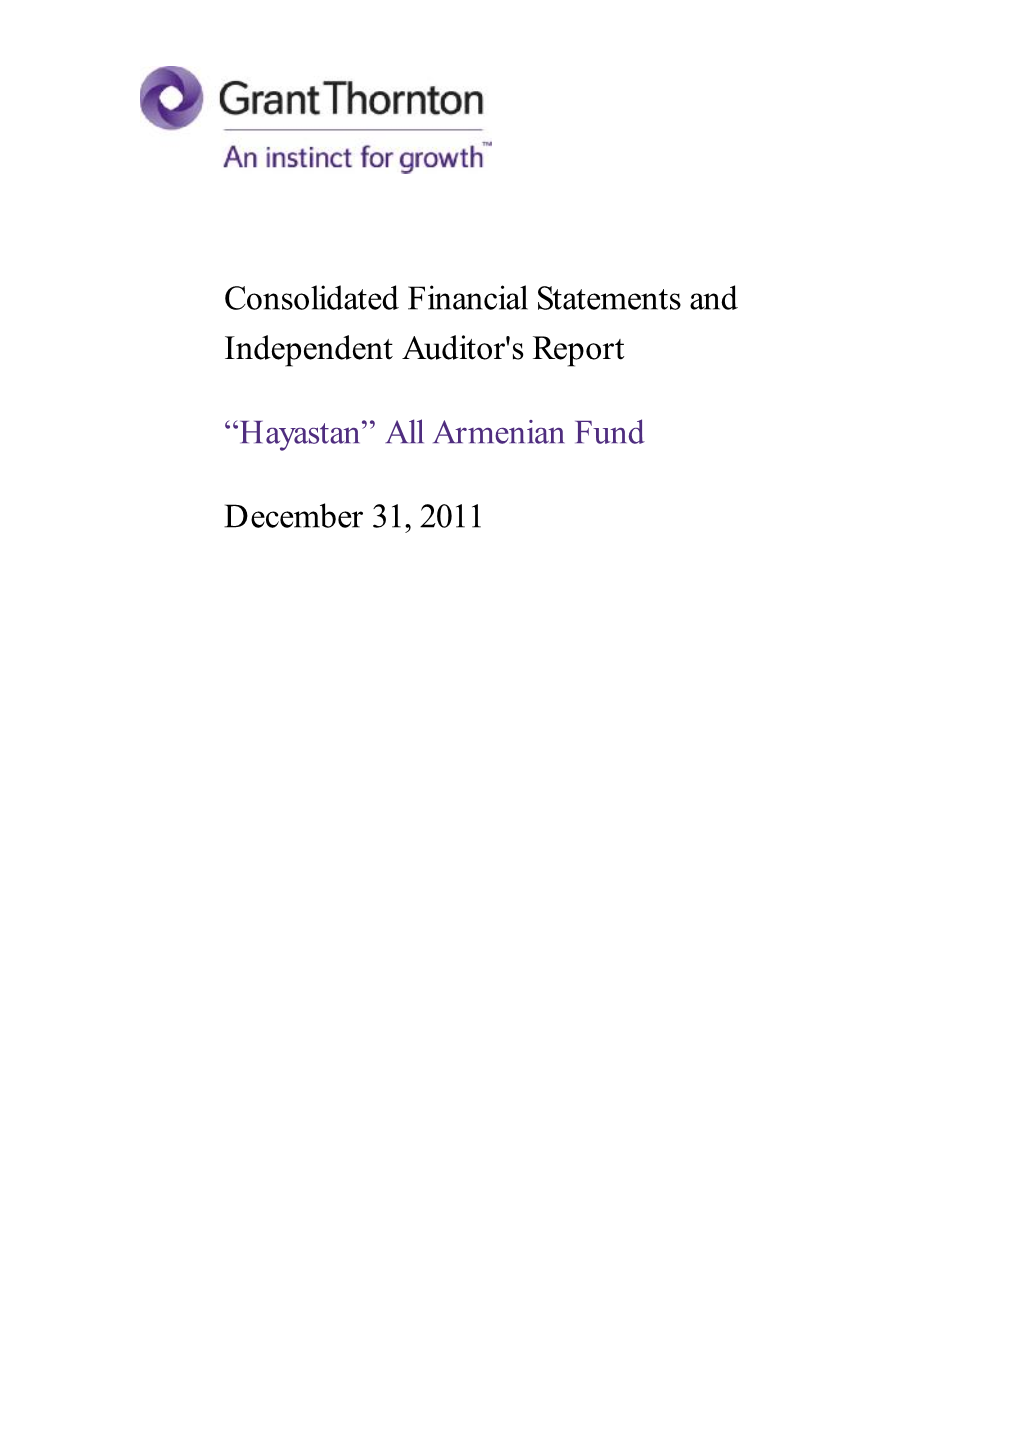 Consolidated Financial Statements and Independent Auditor's Report